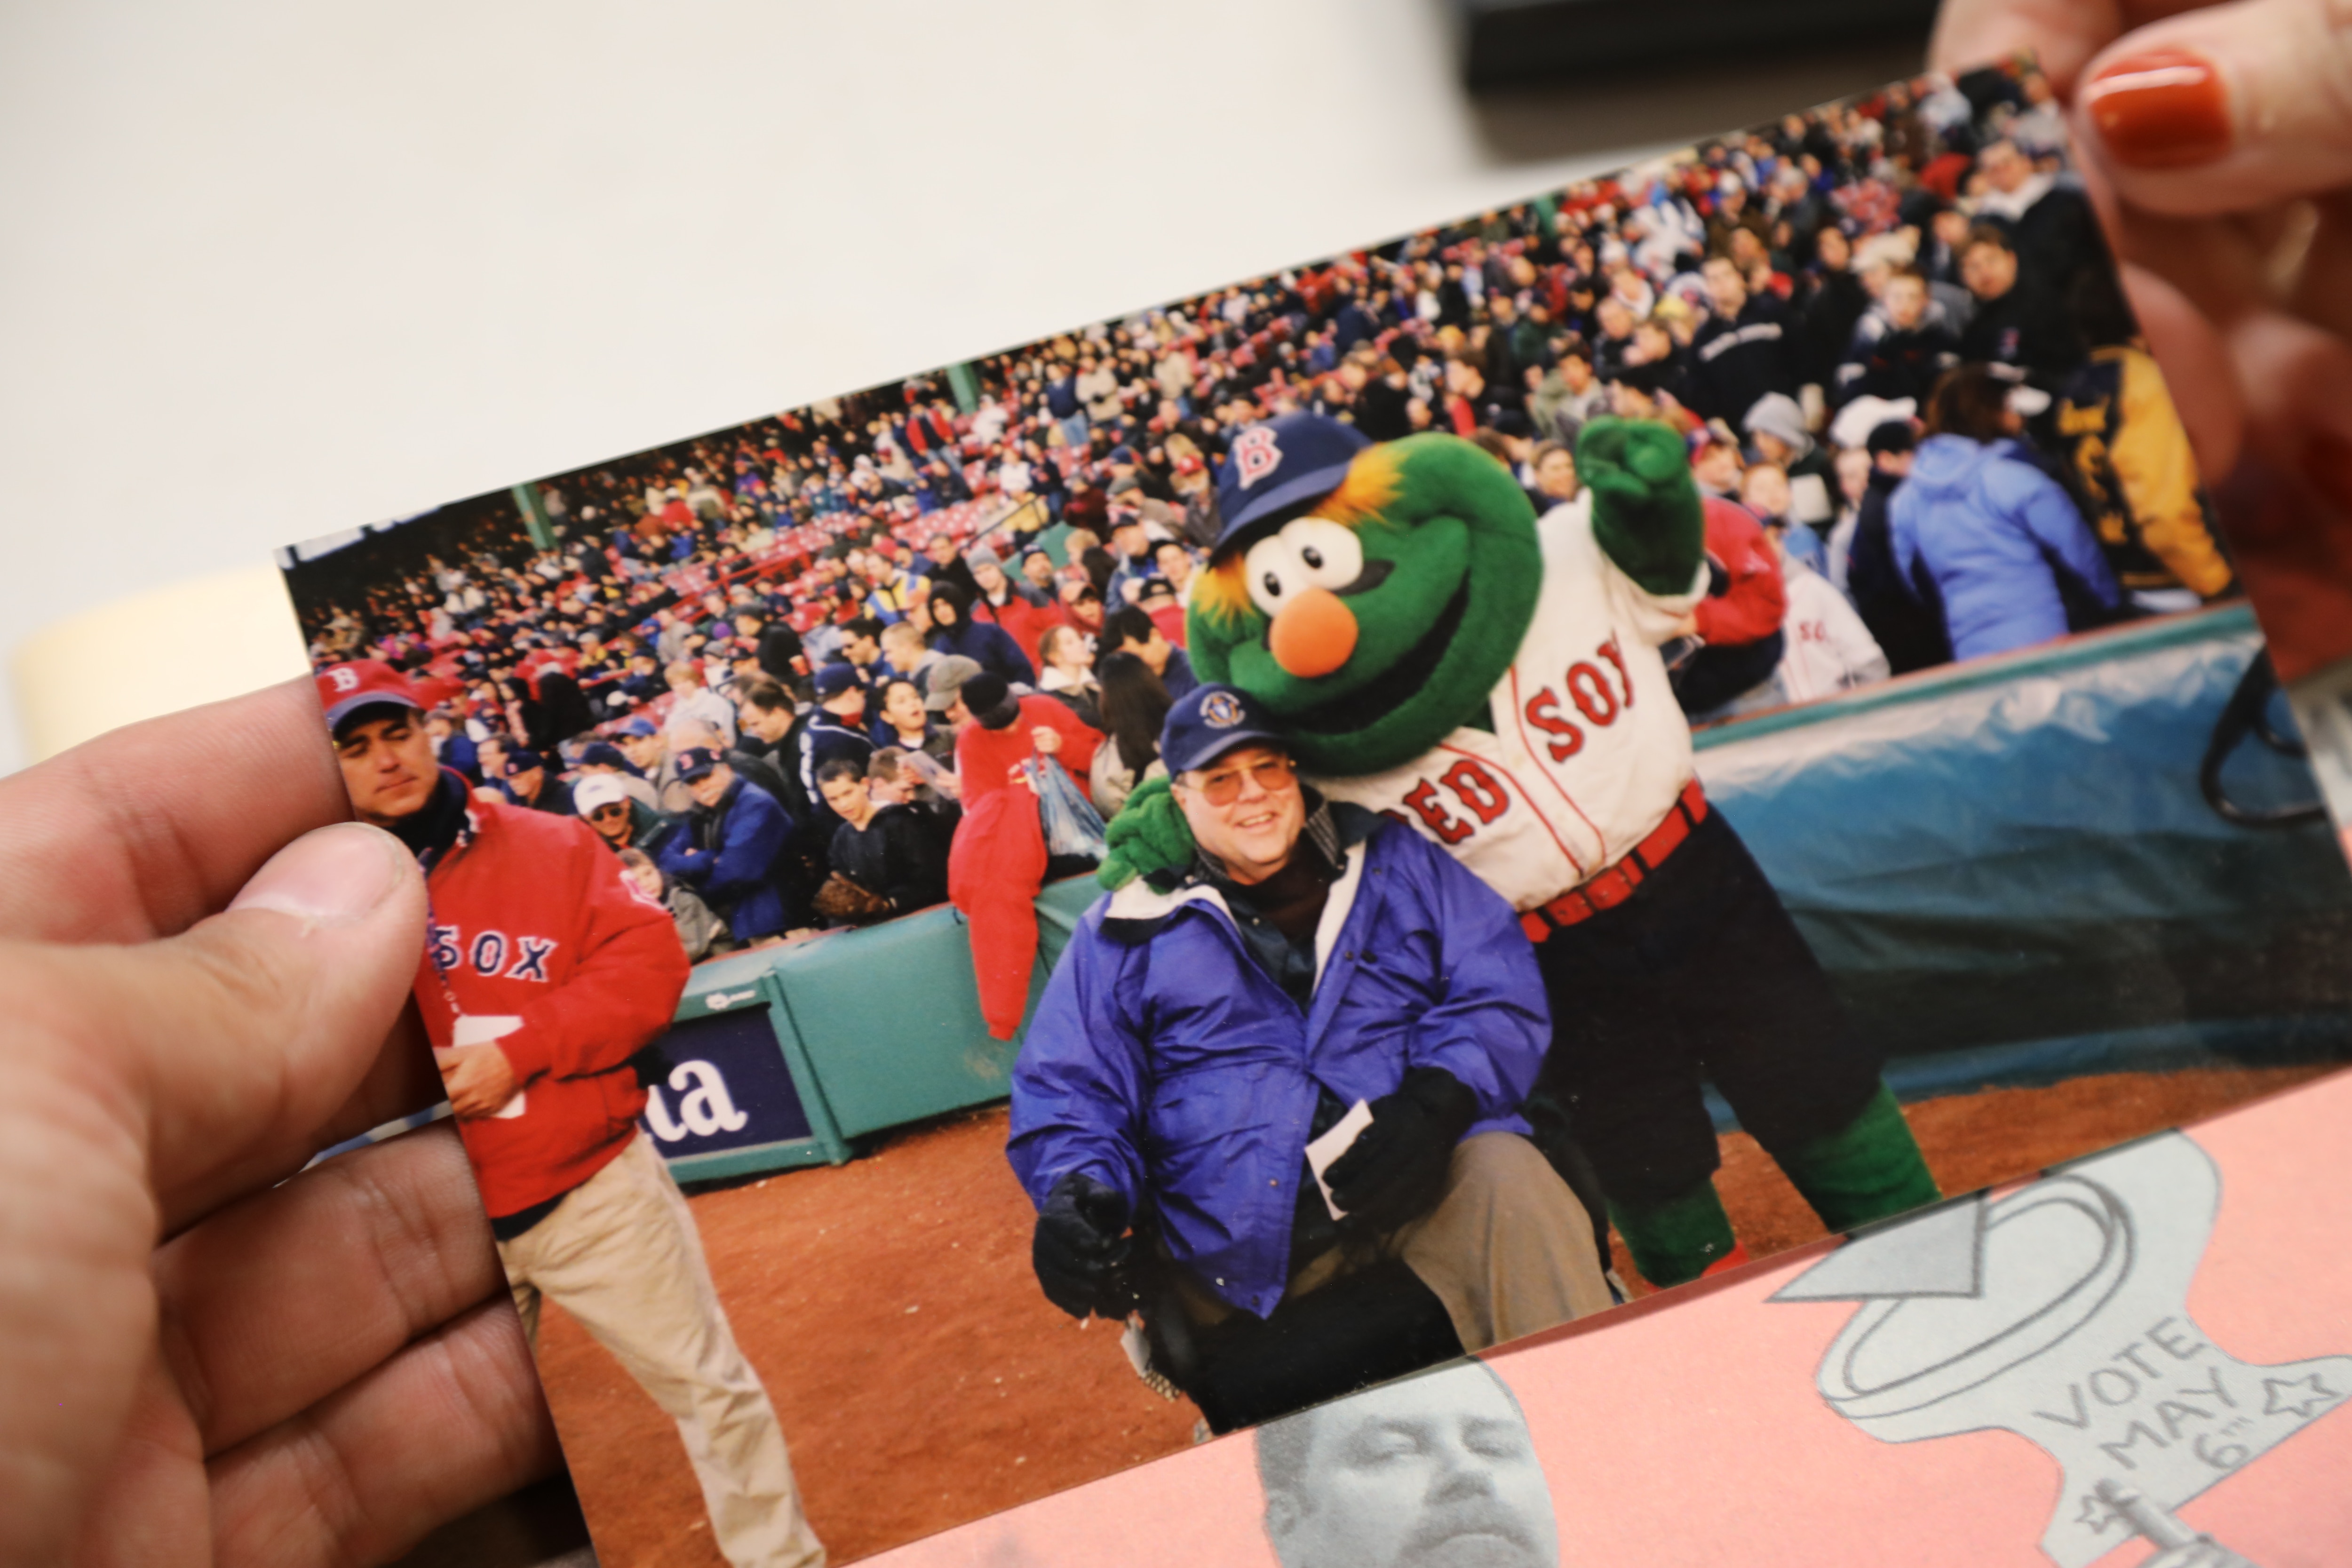 Tom poses with Wally the Green Monster at a Red Sox game. They are on the field and the stands are full behind them